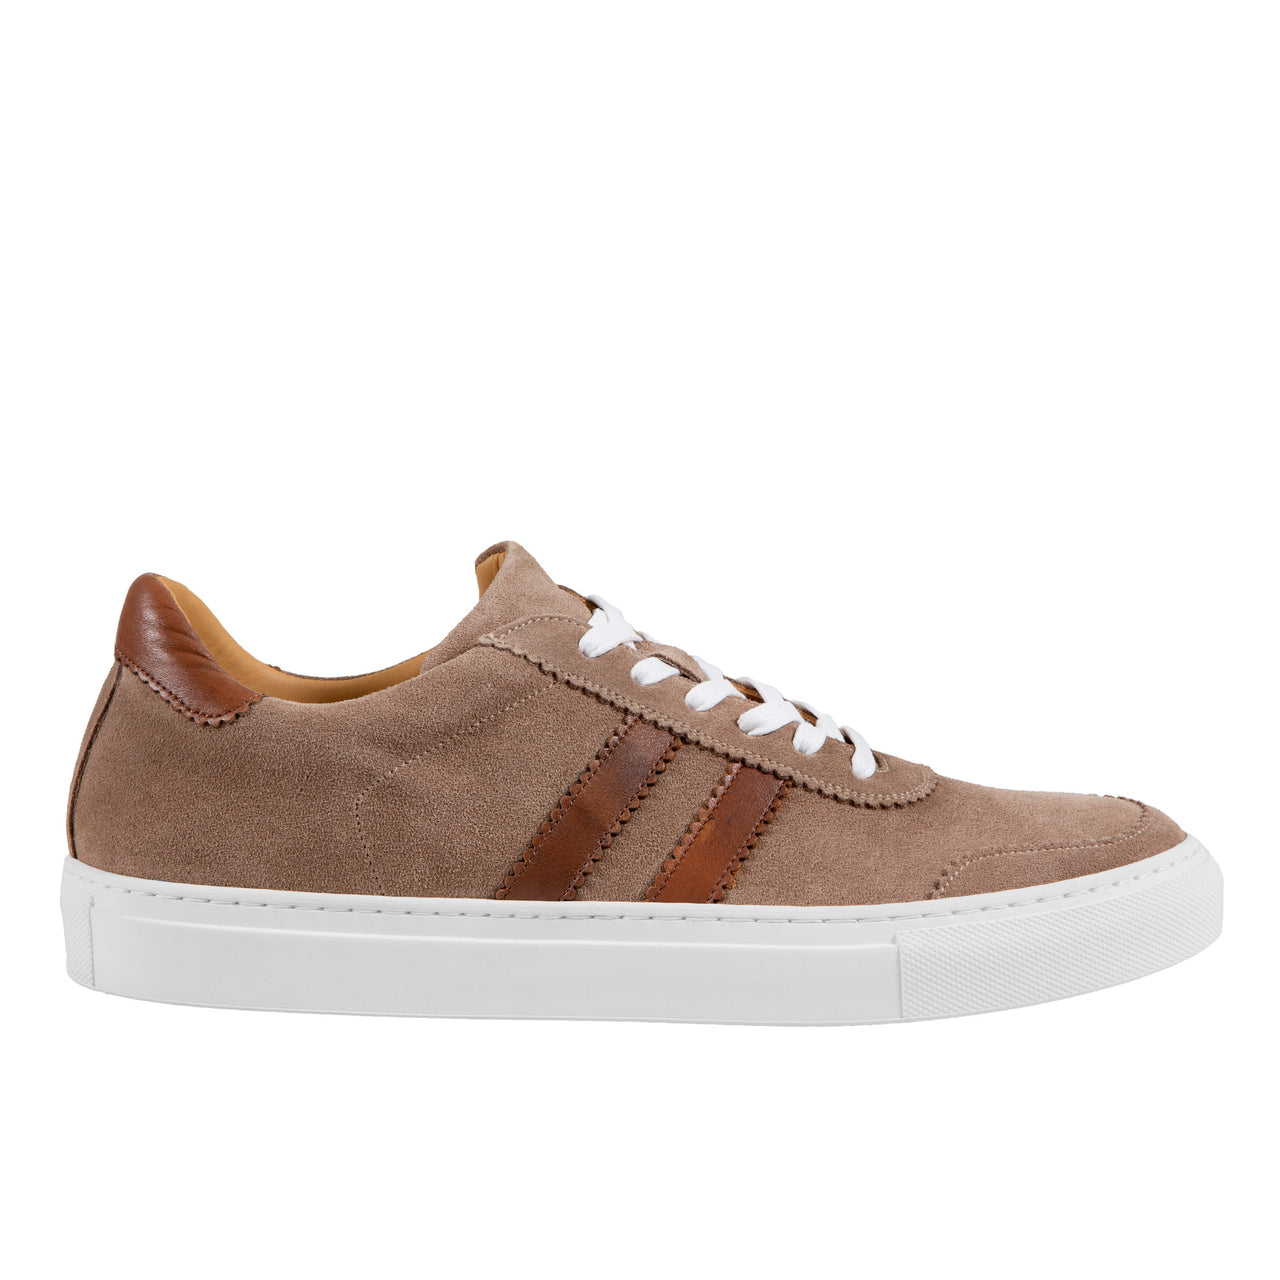 HENRY SARTORIAL Suede Leather Sneakers BROWN